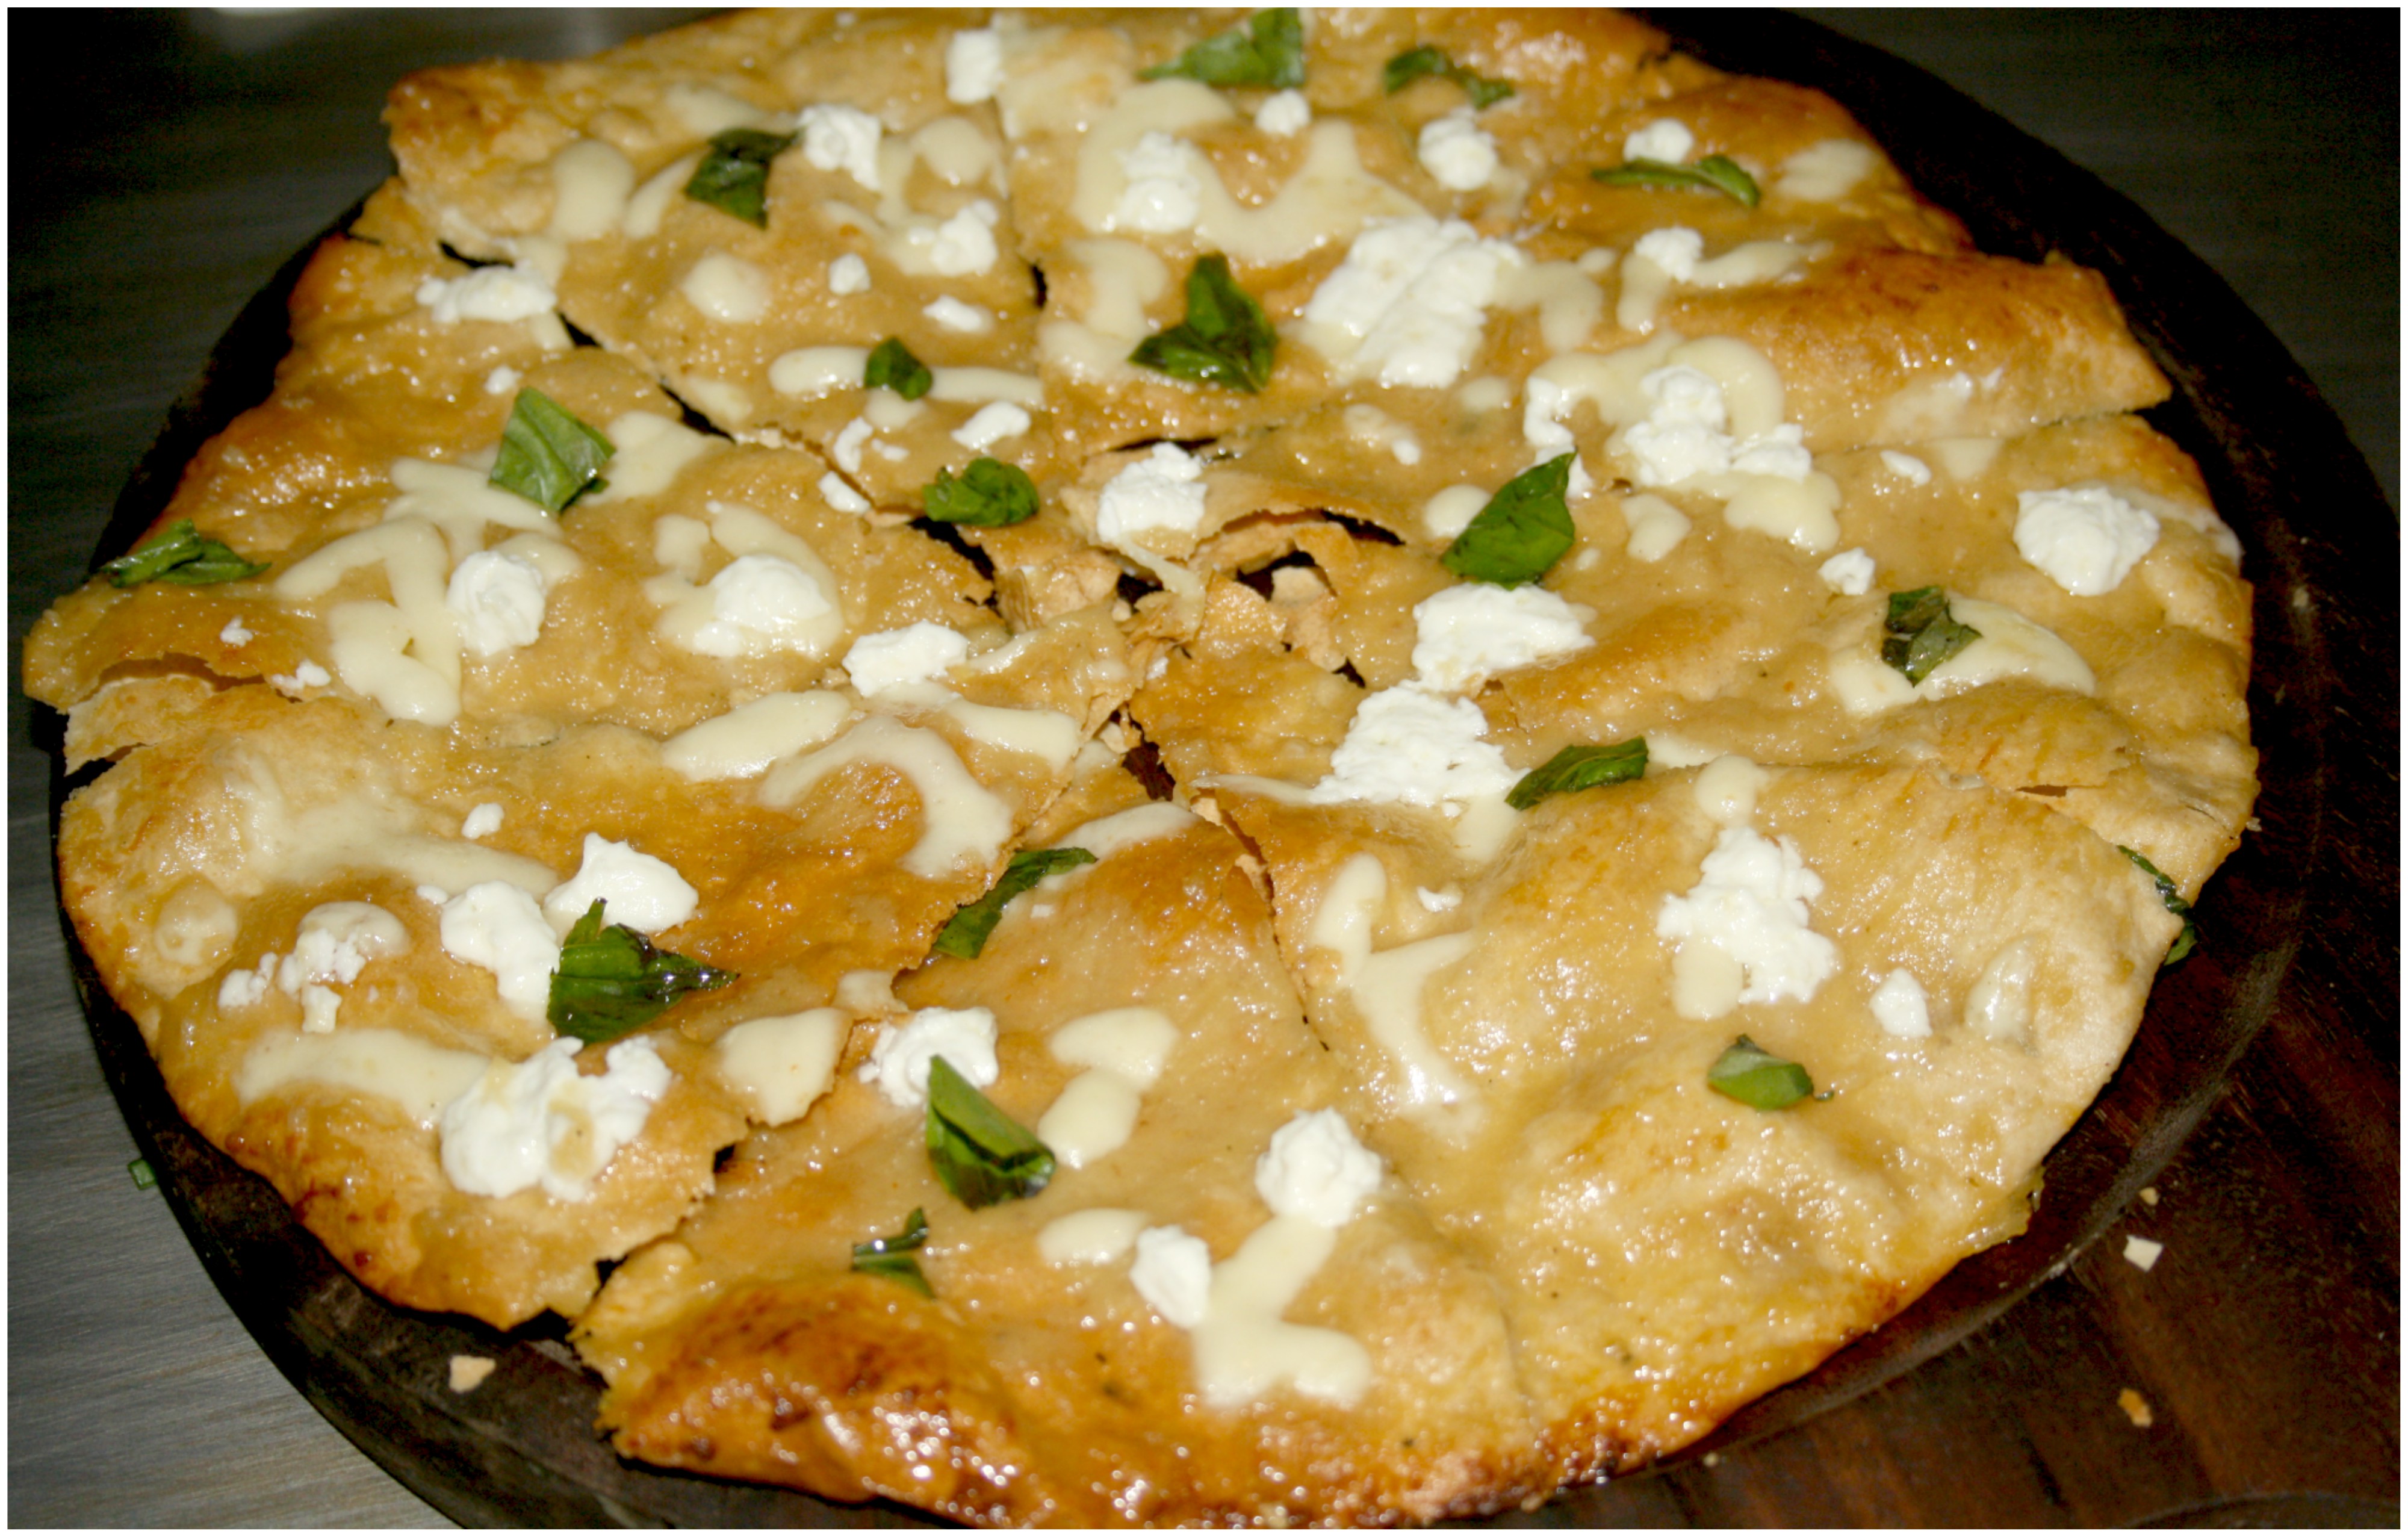 Bianco Pizza – Feta Cheese  with Garlic Confit and Basil.